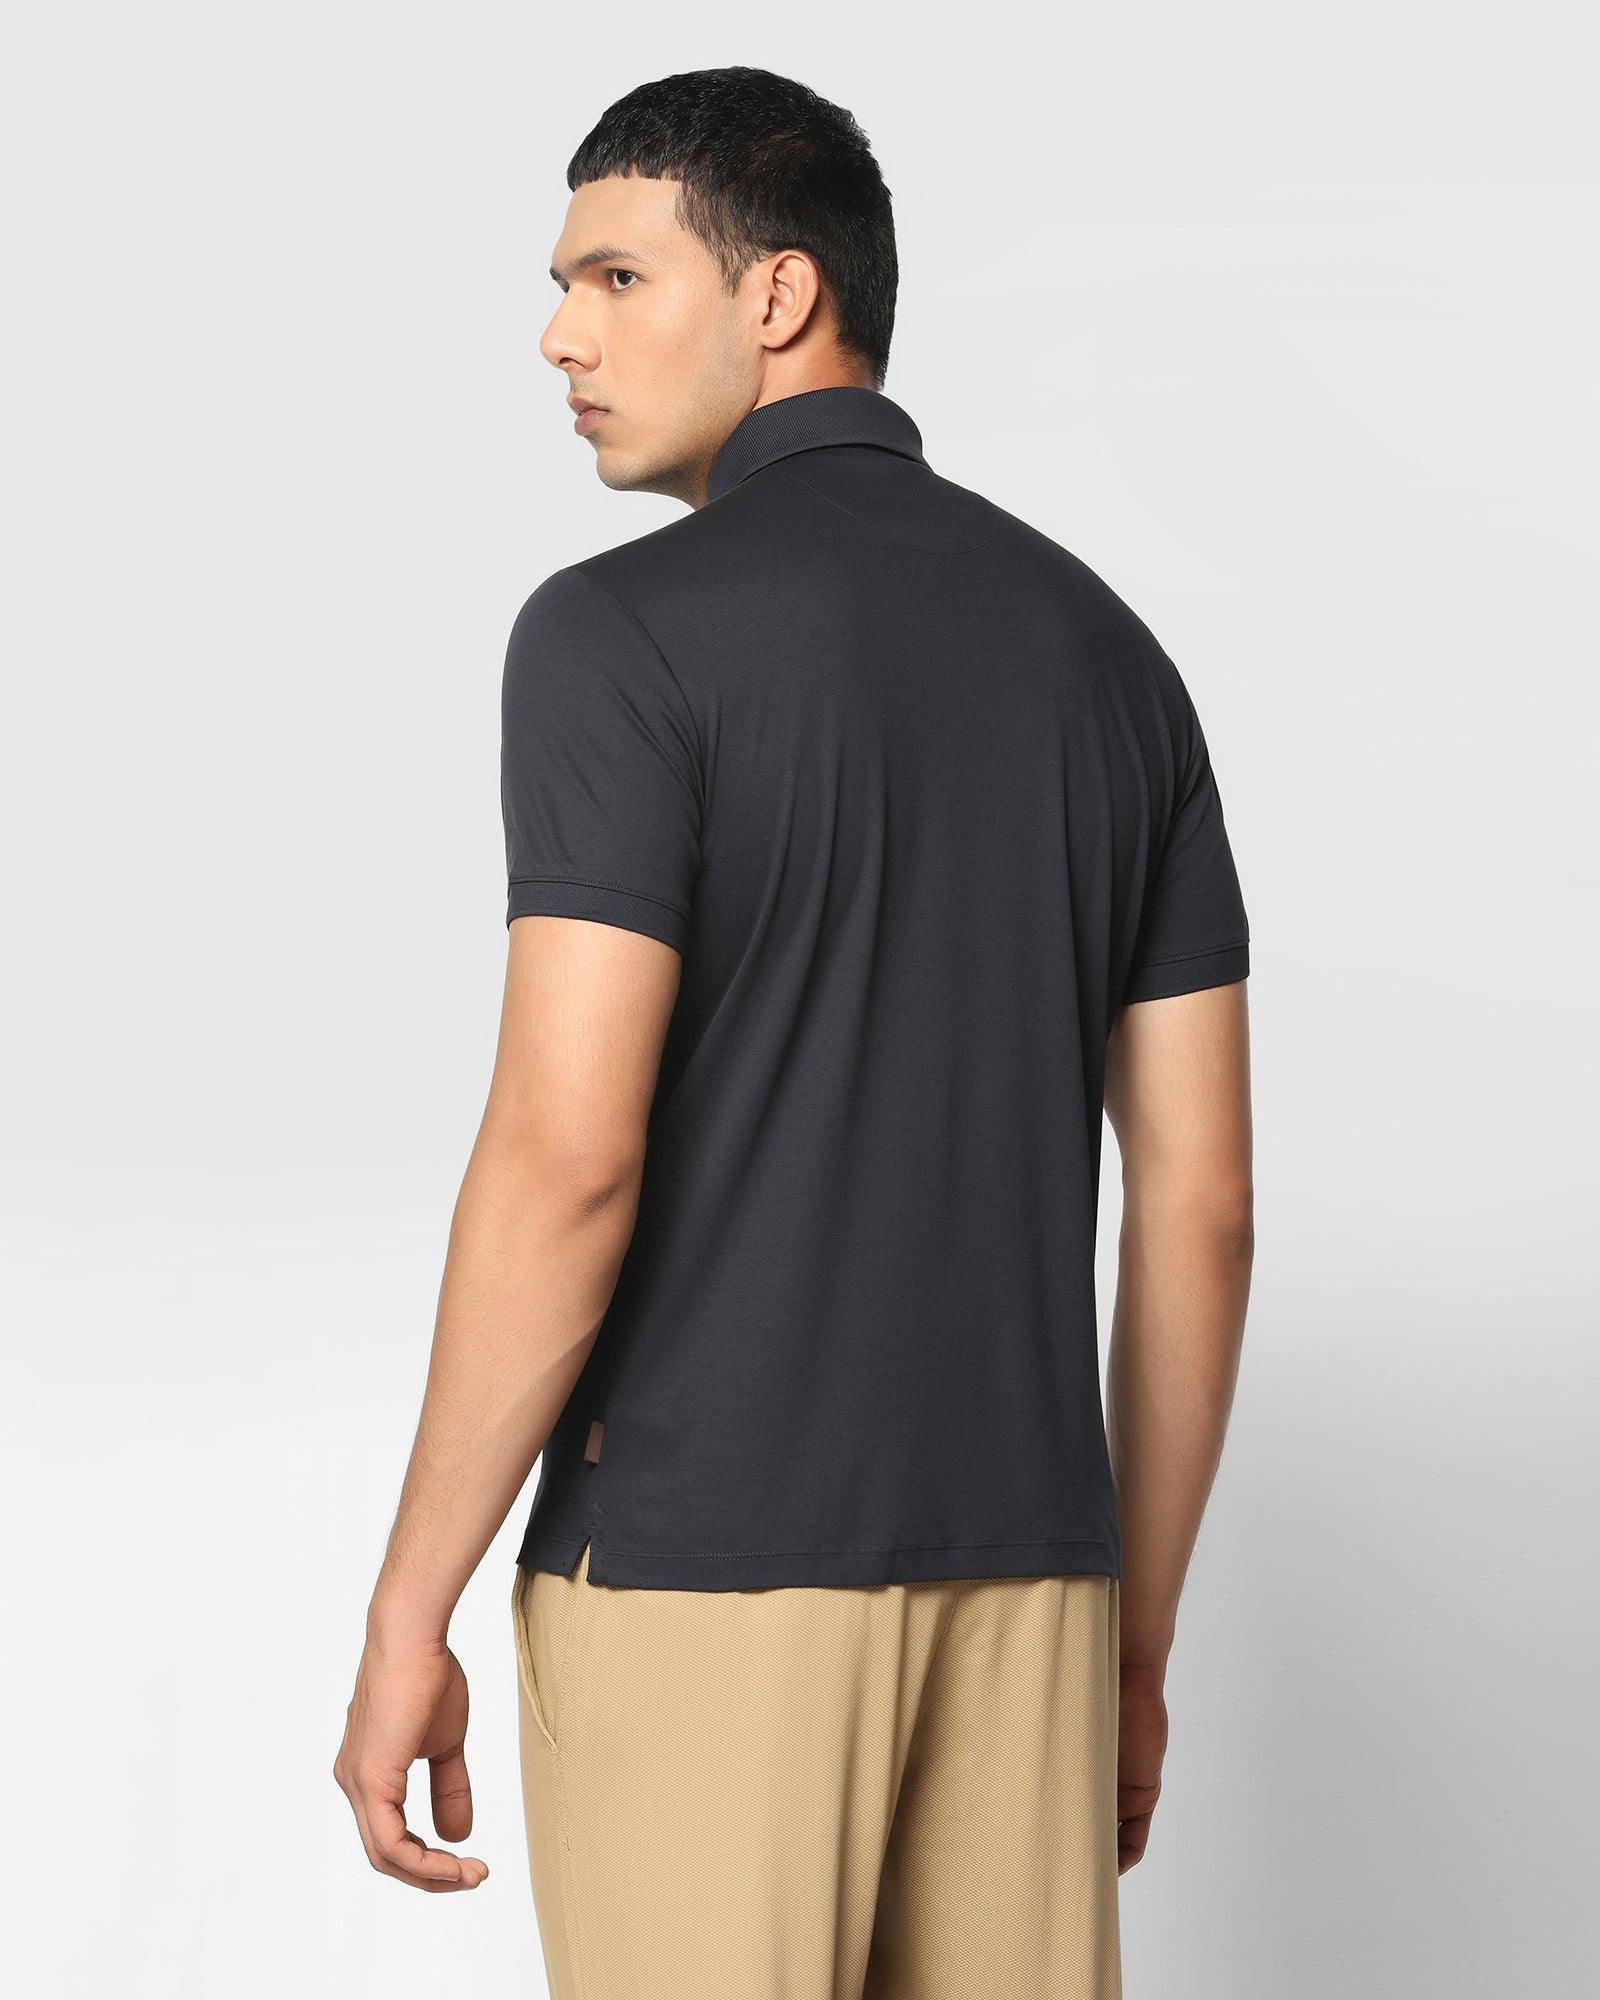 Polo Navy Solid T Shirt - Toll